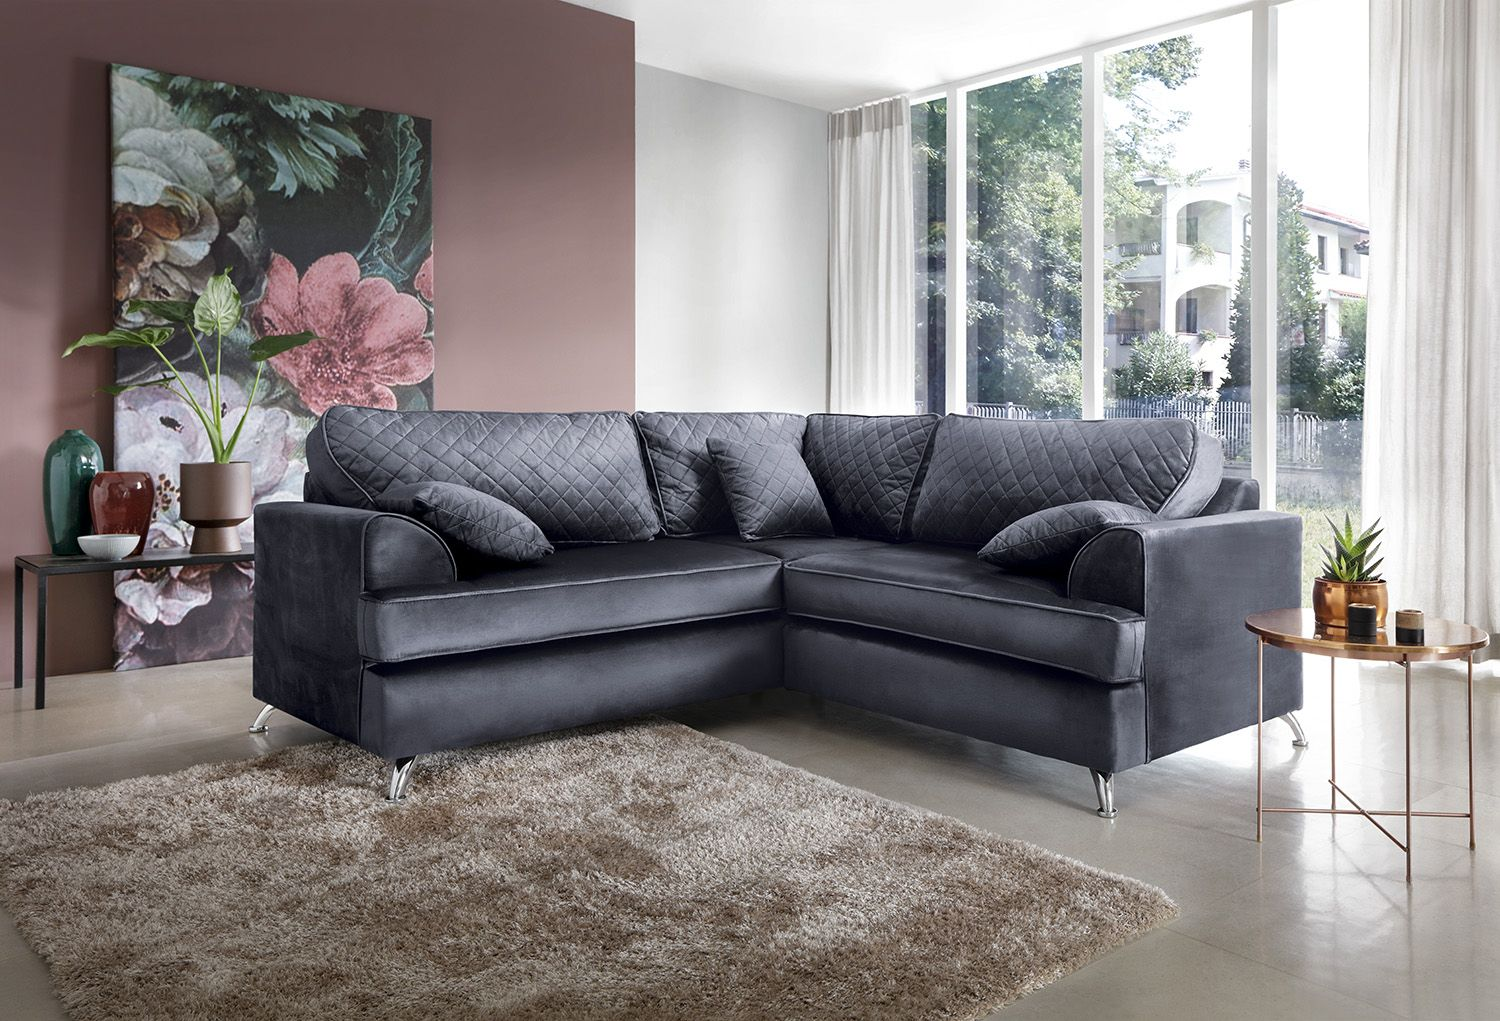 What Curtains For Sofa Colour, What Colour Curtains Go With Brown Leather Sofa And Cream Walls